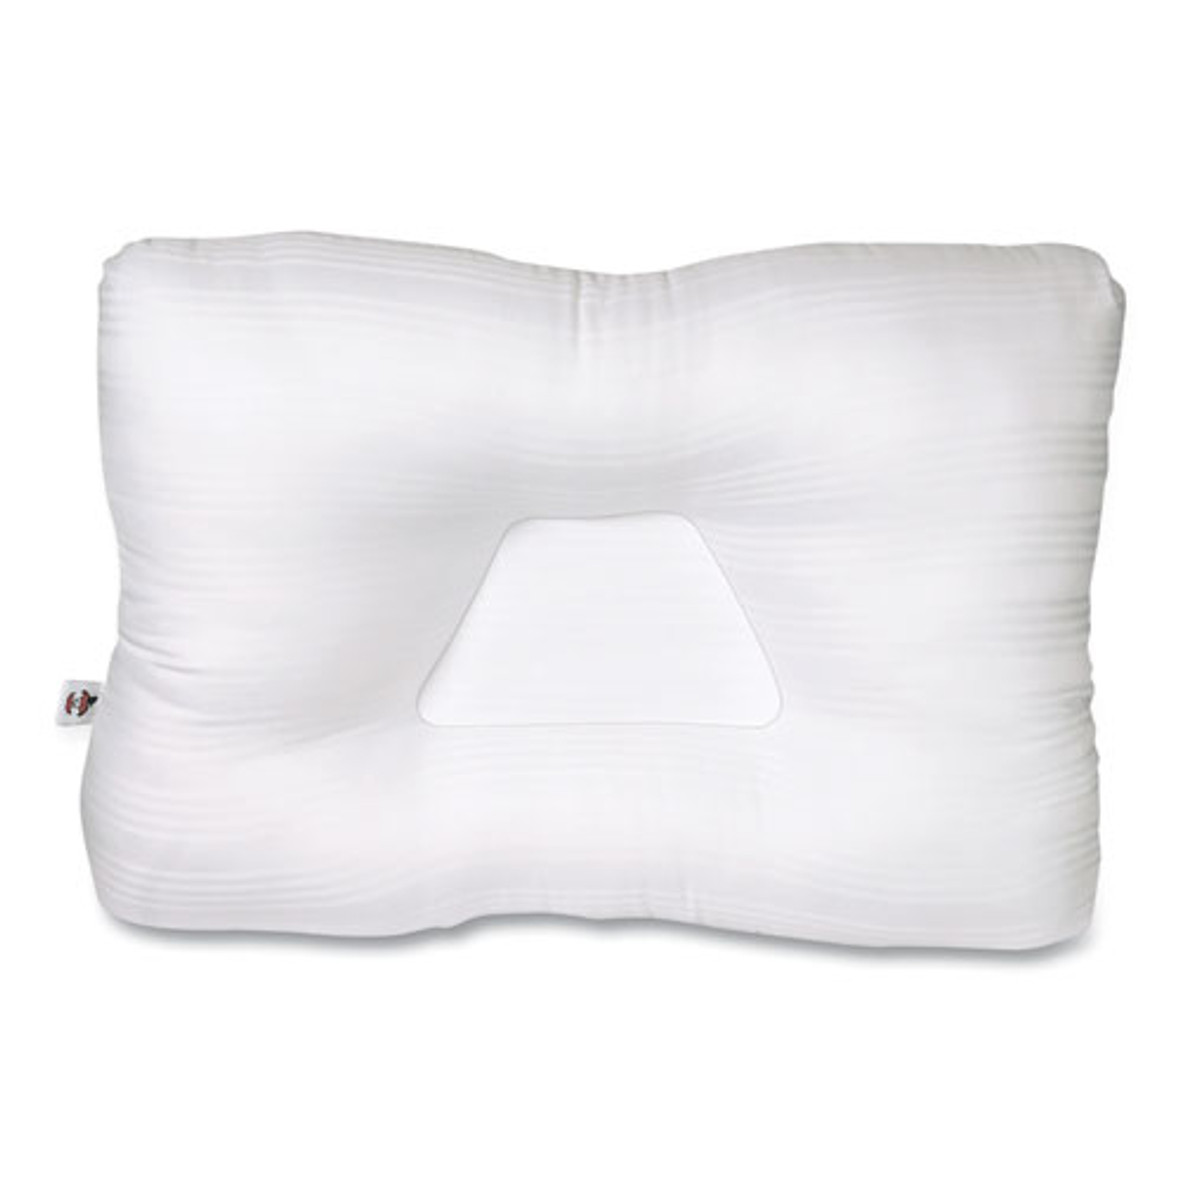 Core Products® Mid-Core Cervical Pillow, Standard, 22 x 4 x 15, Gentle, White (Pack of 1)